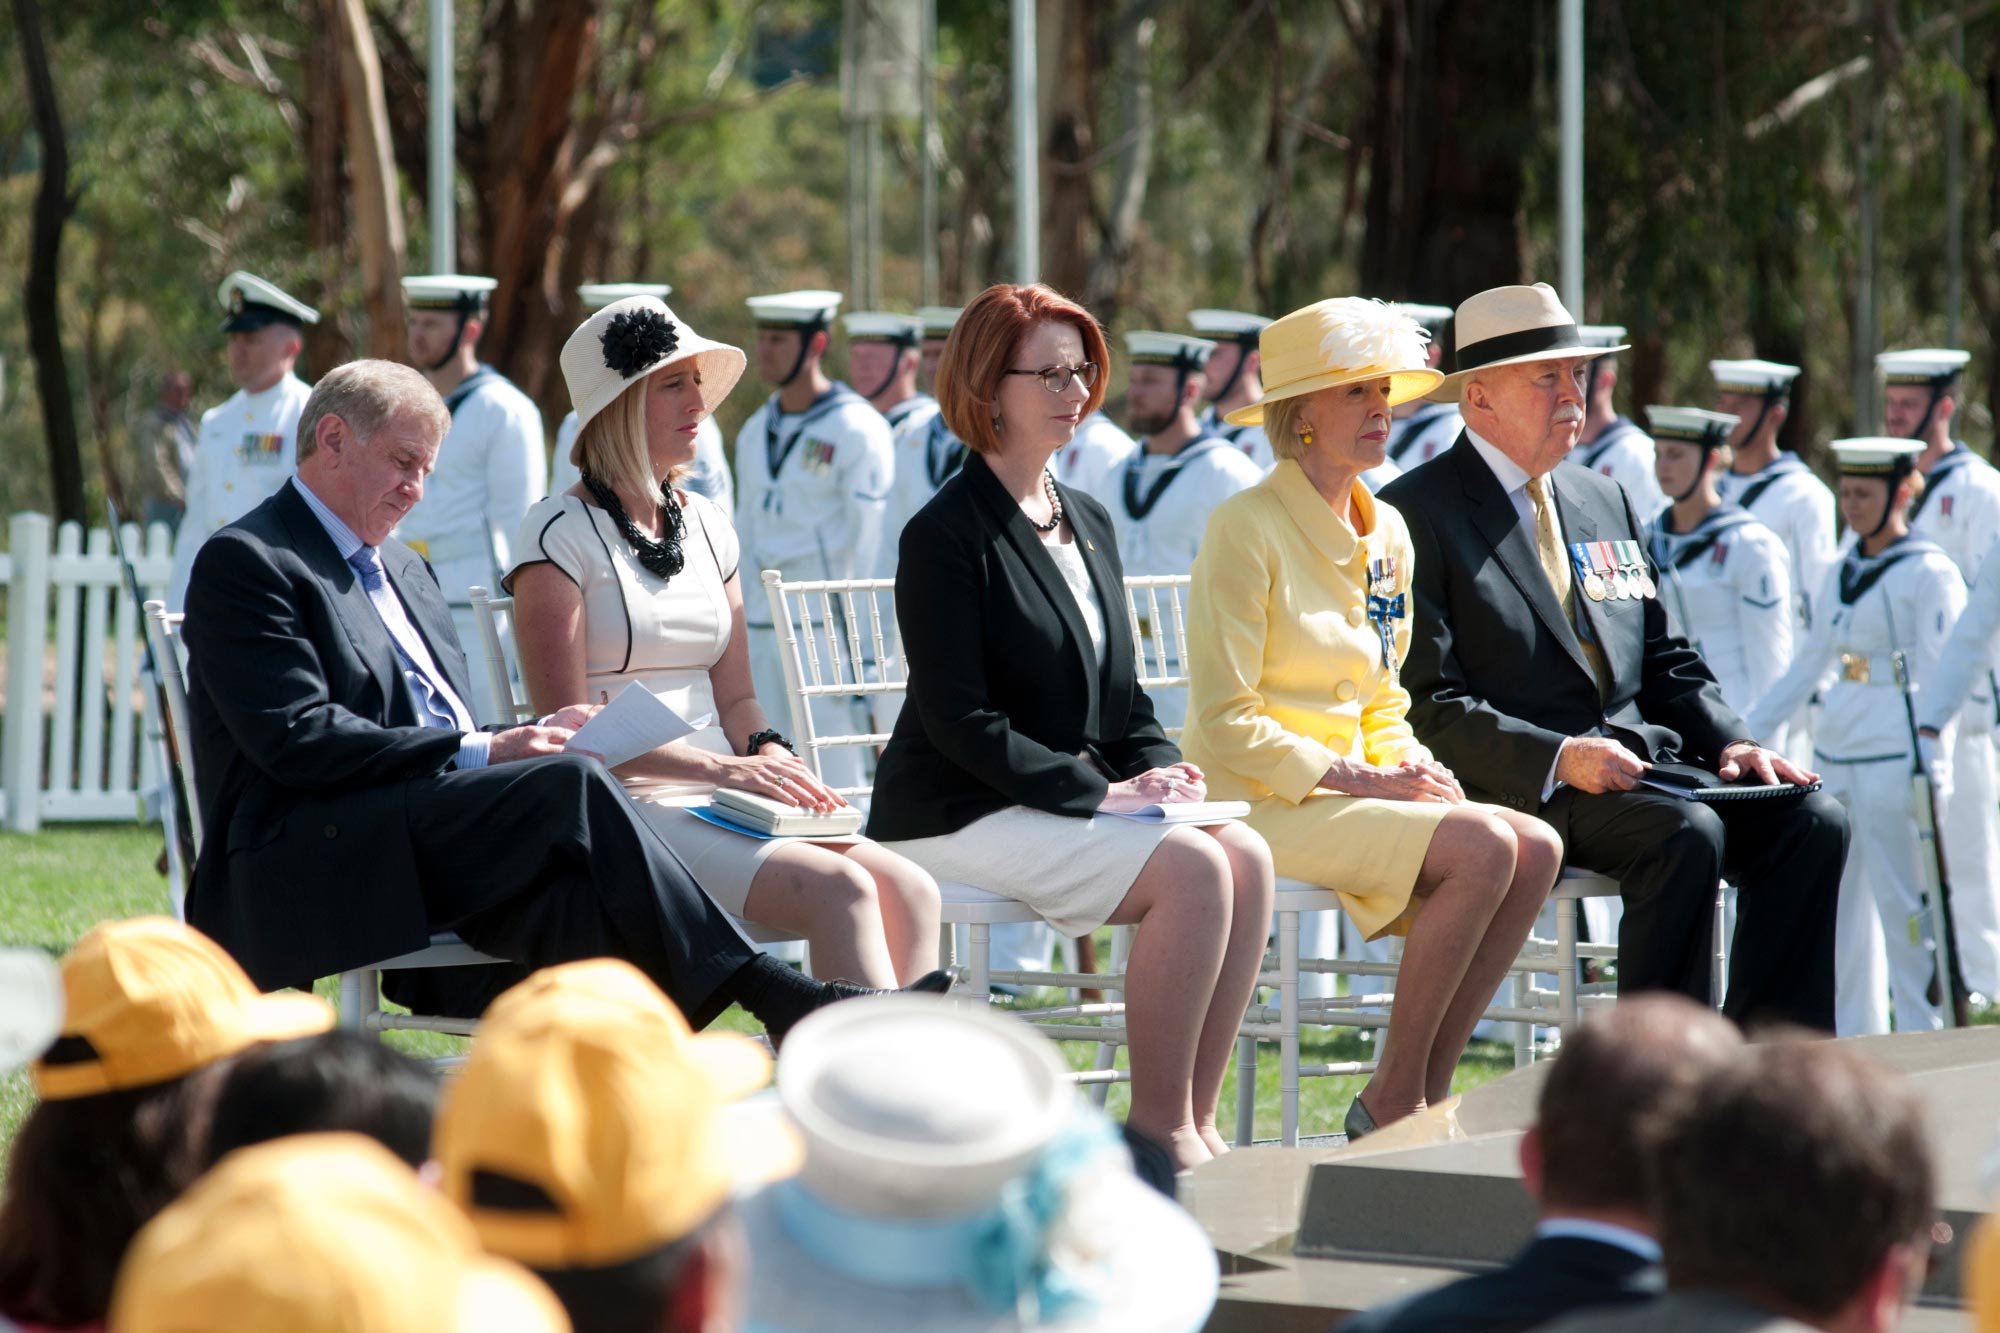 Prime Minister Julia Gillard and Governor-General Ms Quentin Bryce attend centenary of Canberra celebrations, 2013
